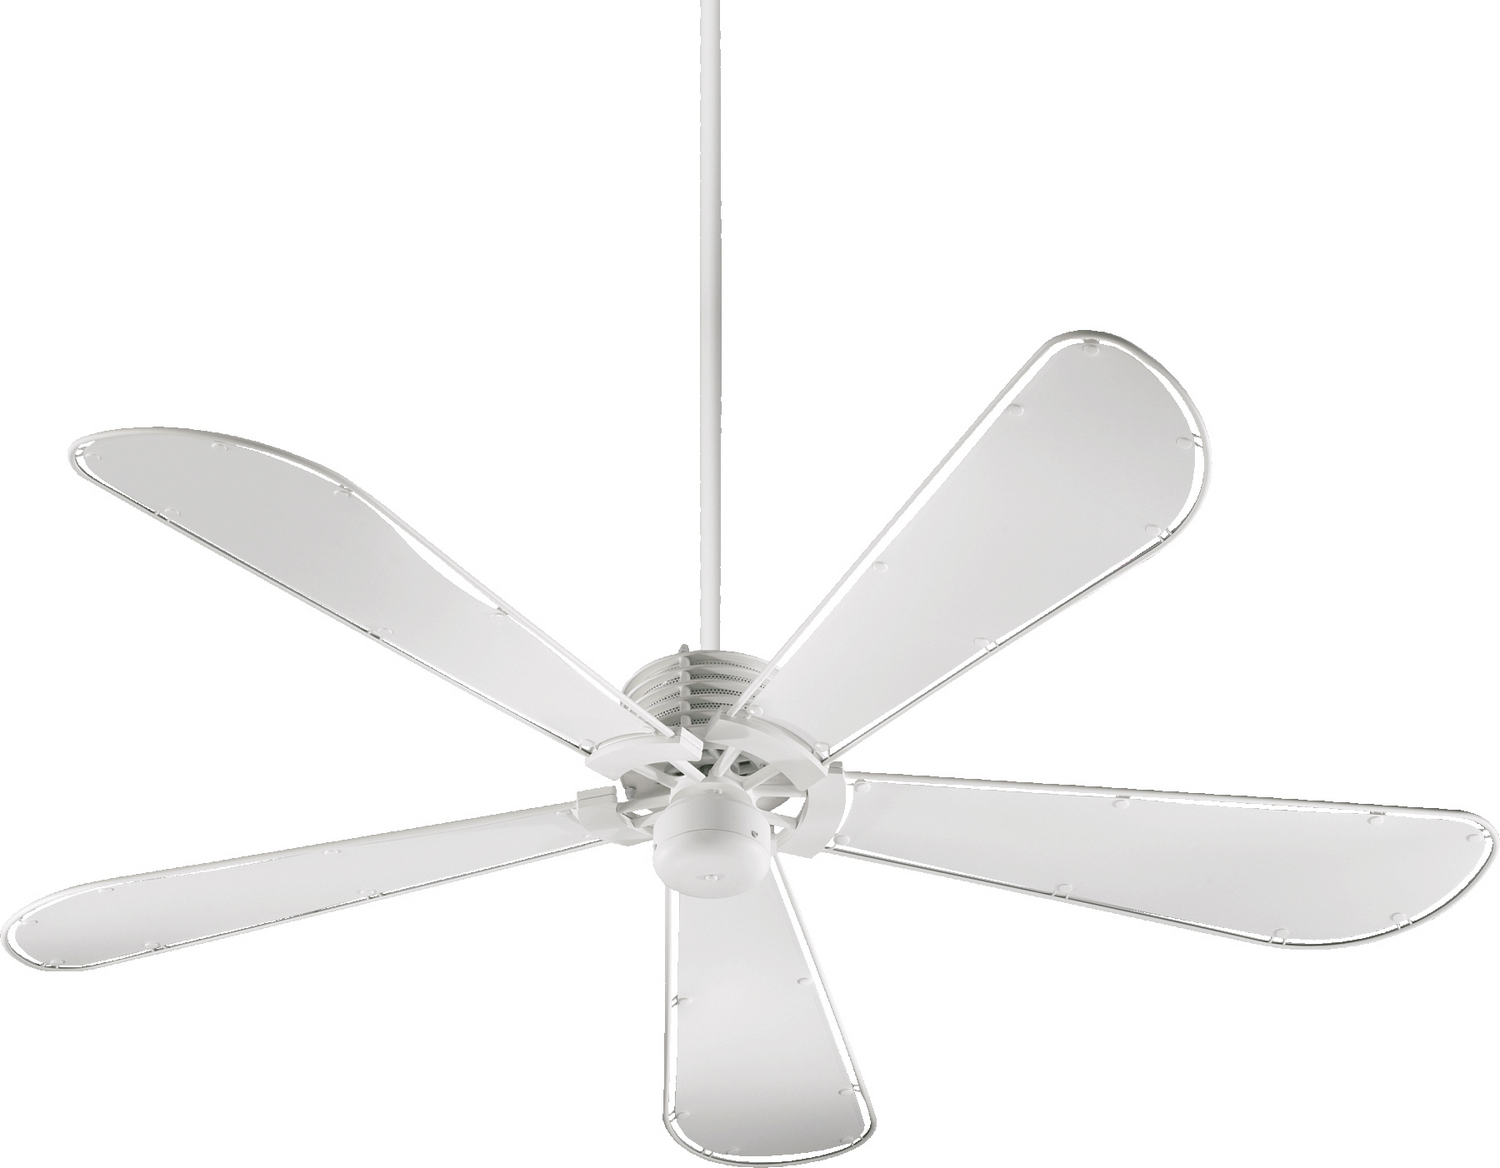 Dragonfly Ceiling Fan By Quorum 59605 8